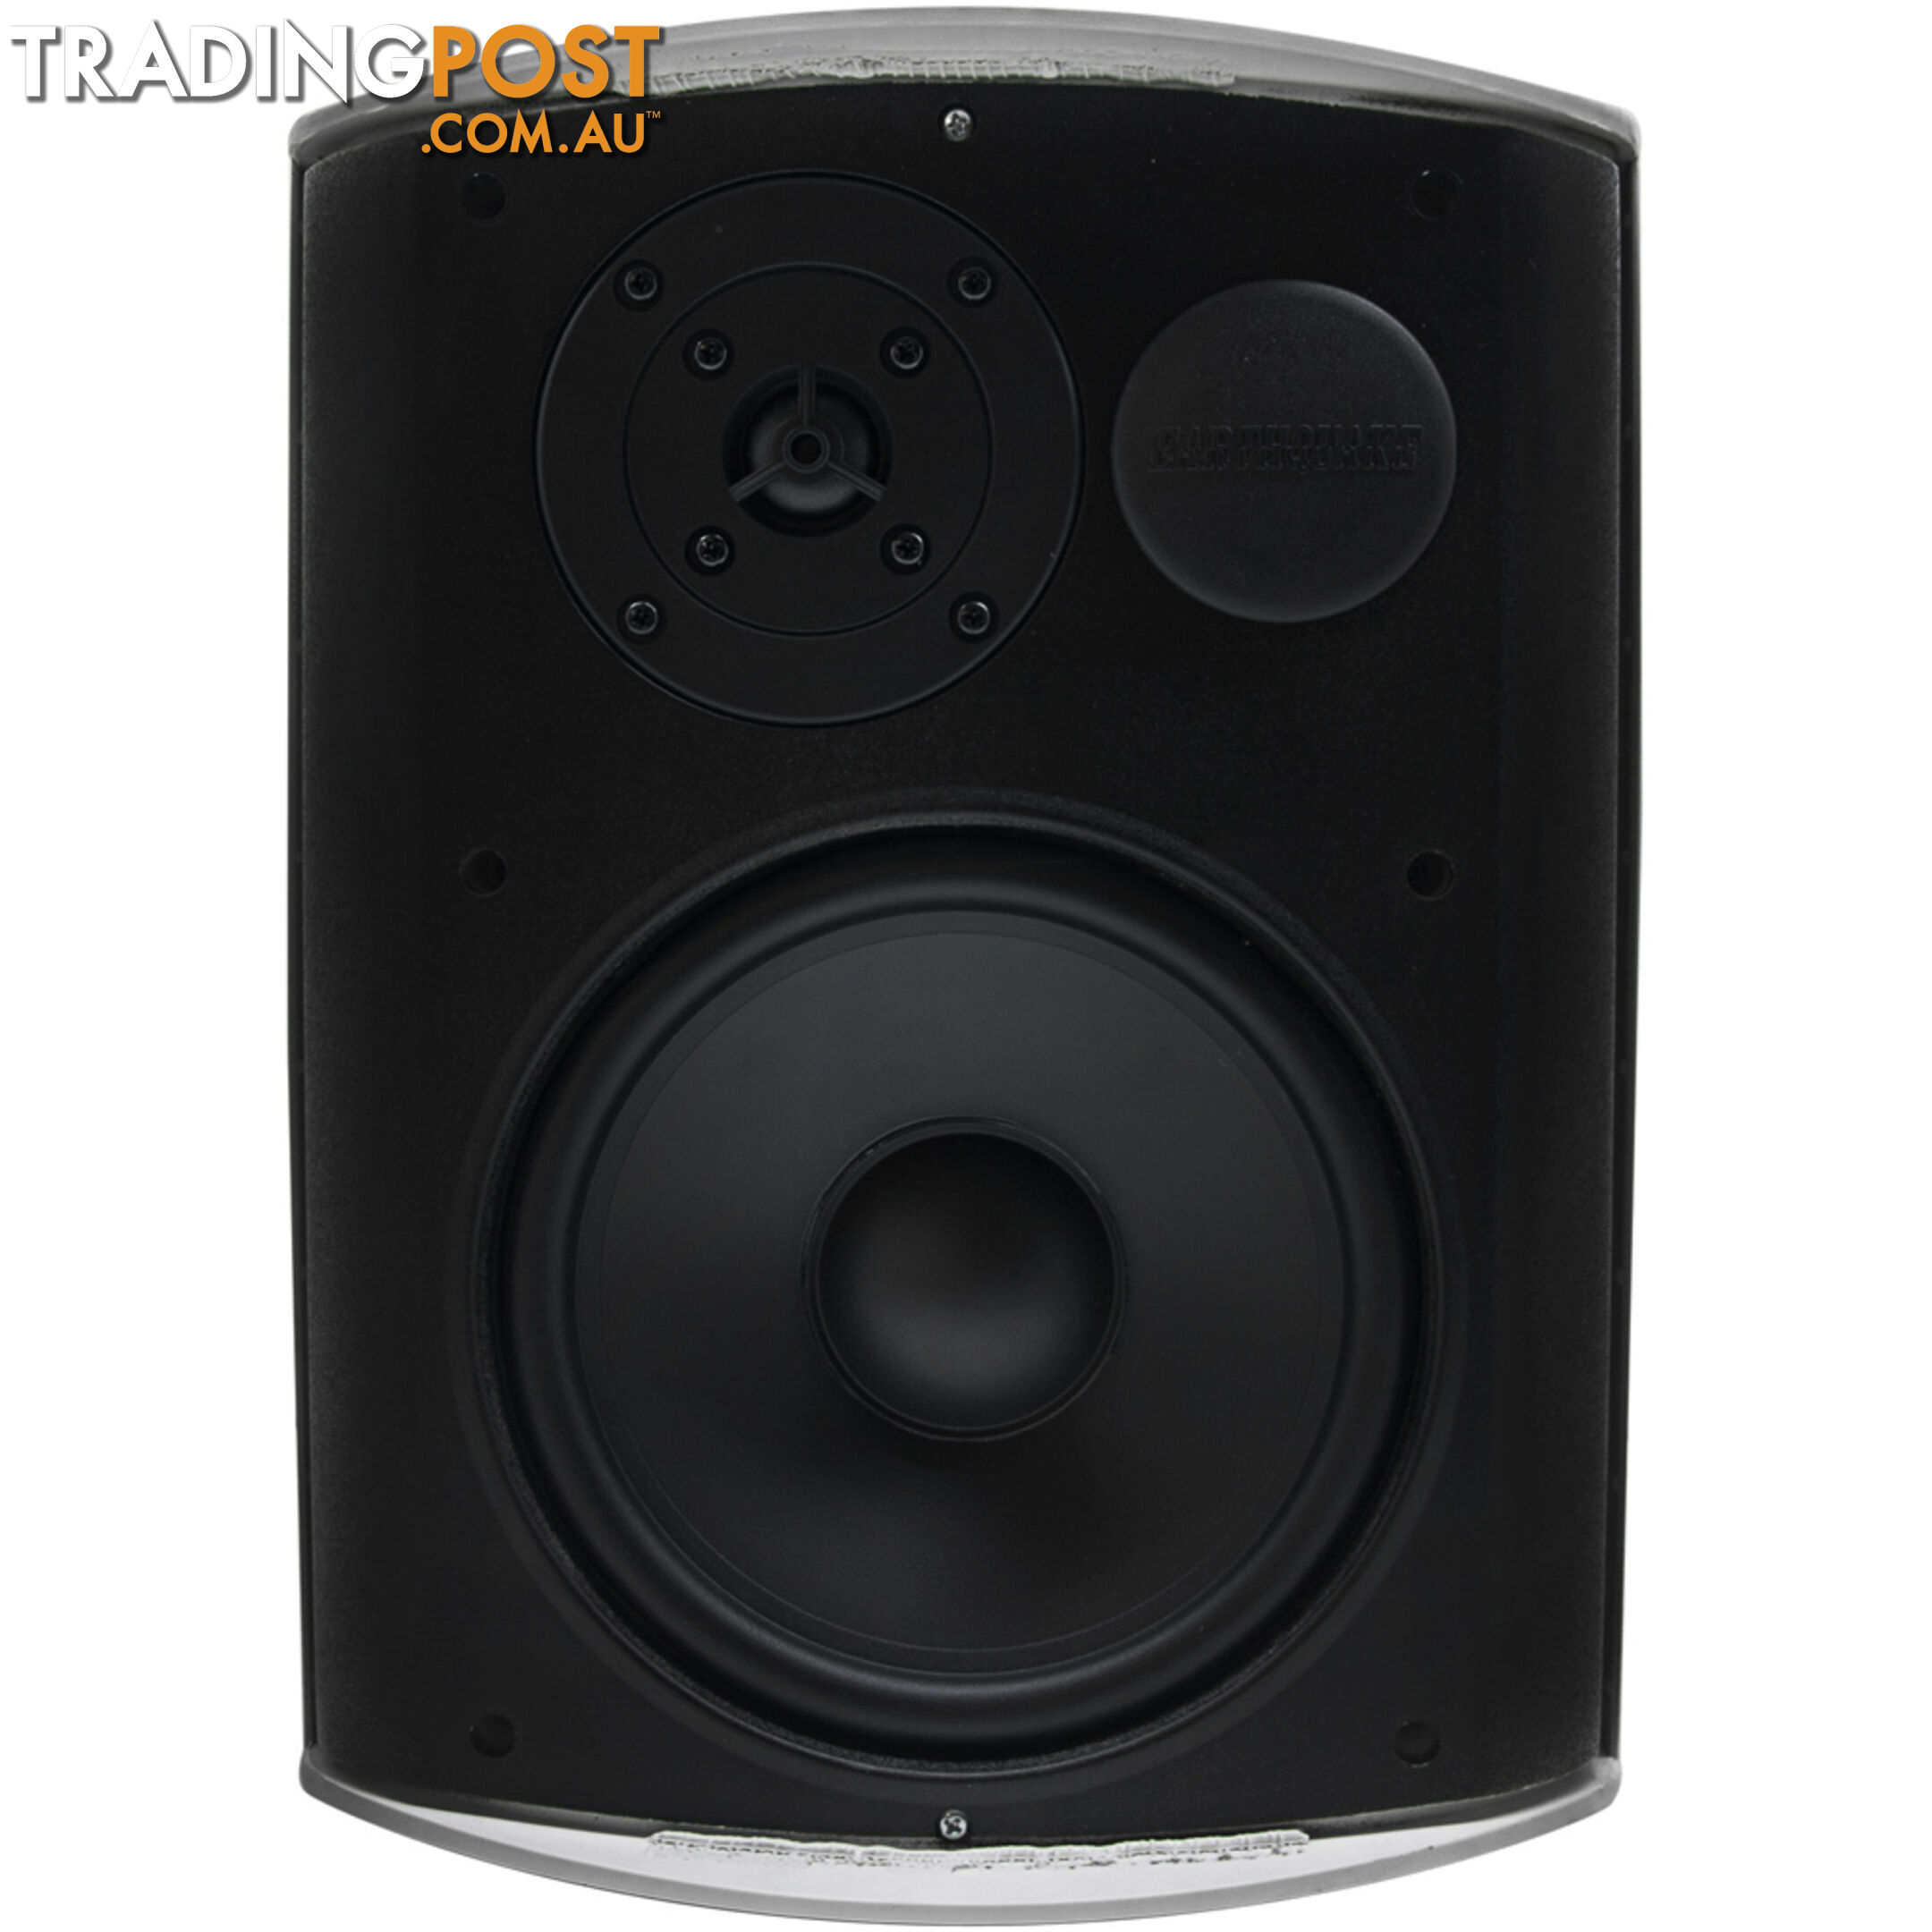 AWS802W 8" INDOOR/OUTDOOR SPEAKER WHITE EARTHQUAKE SOLD SINGLE